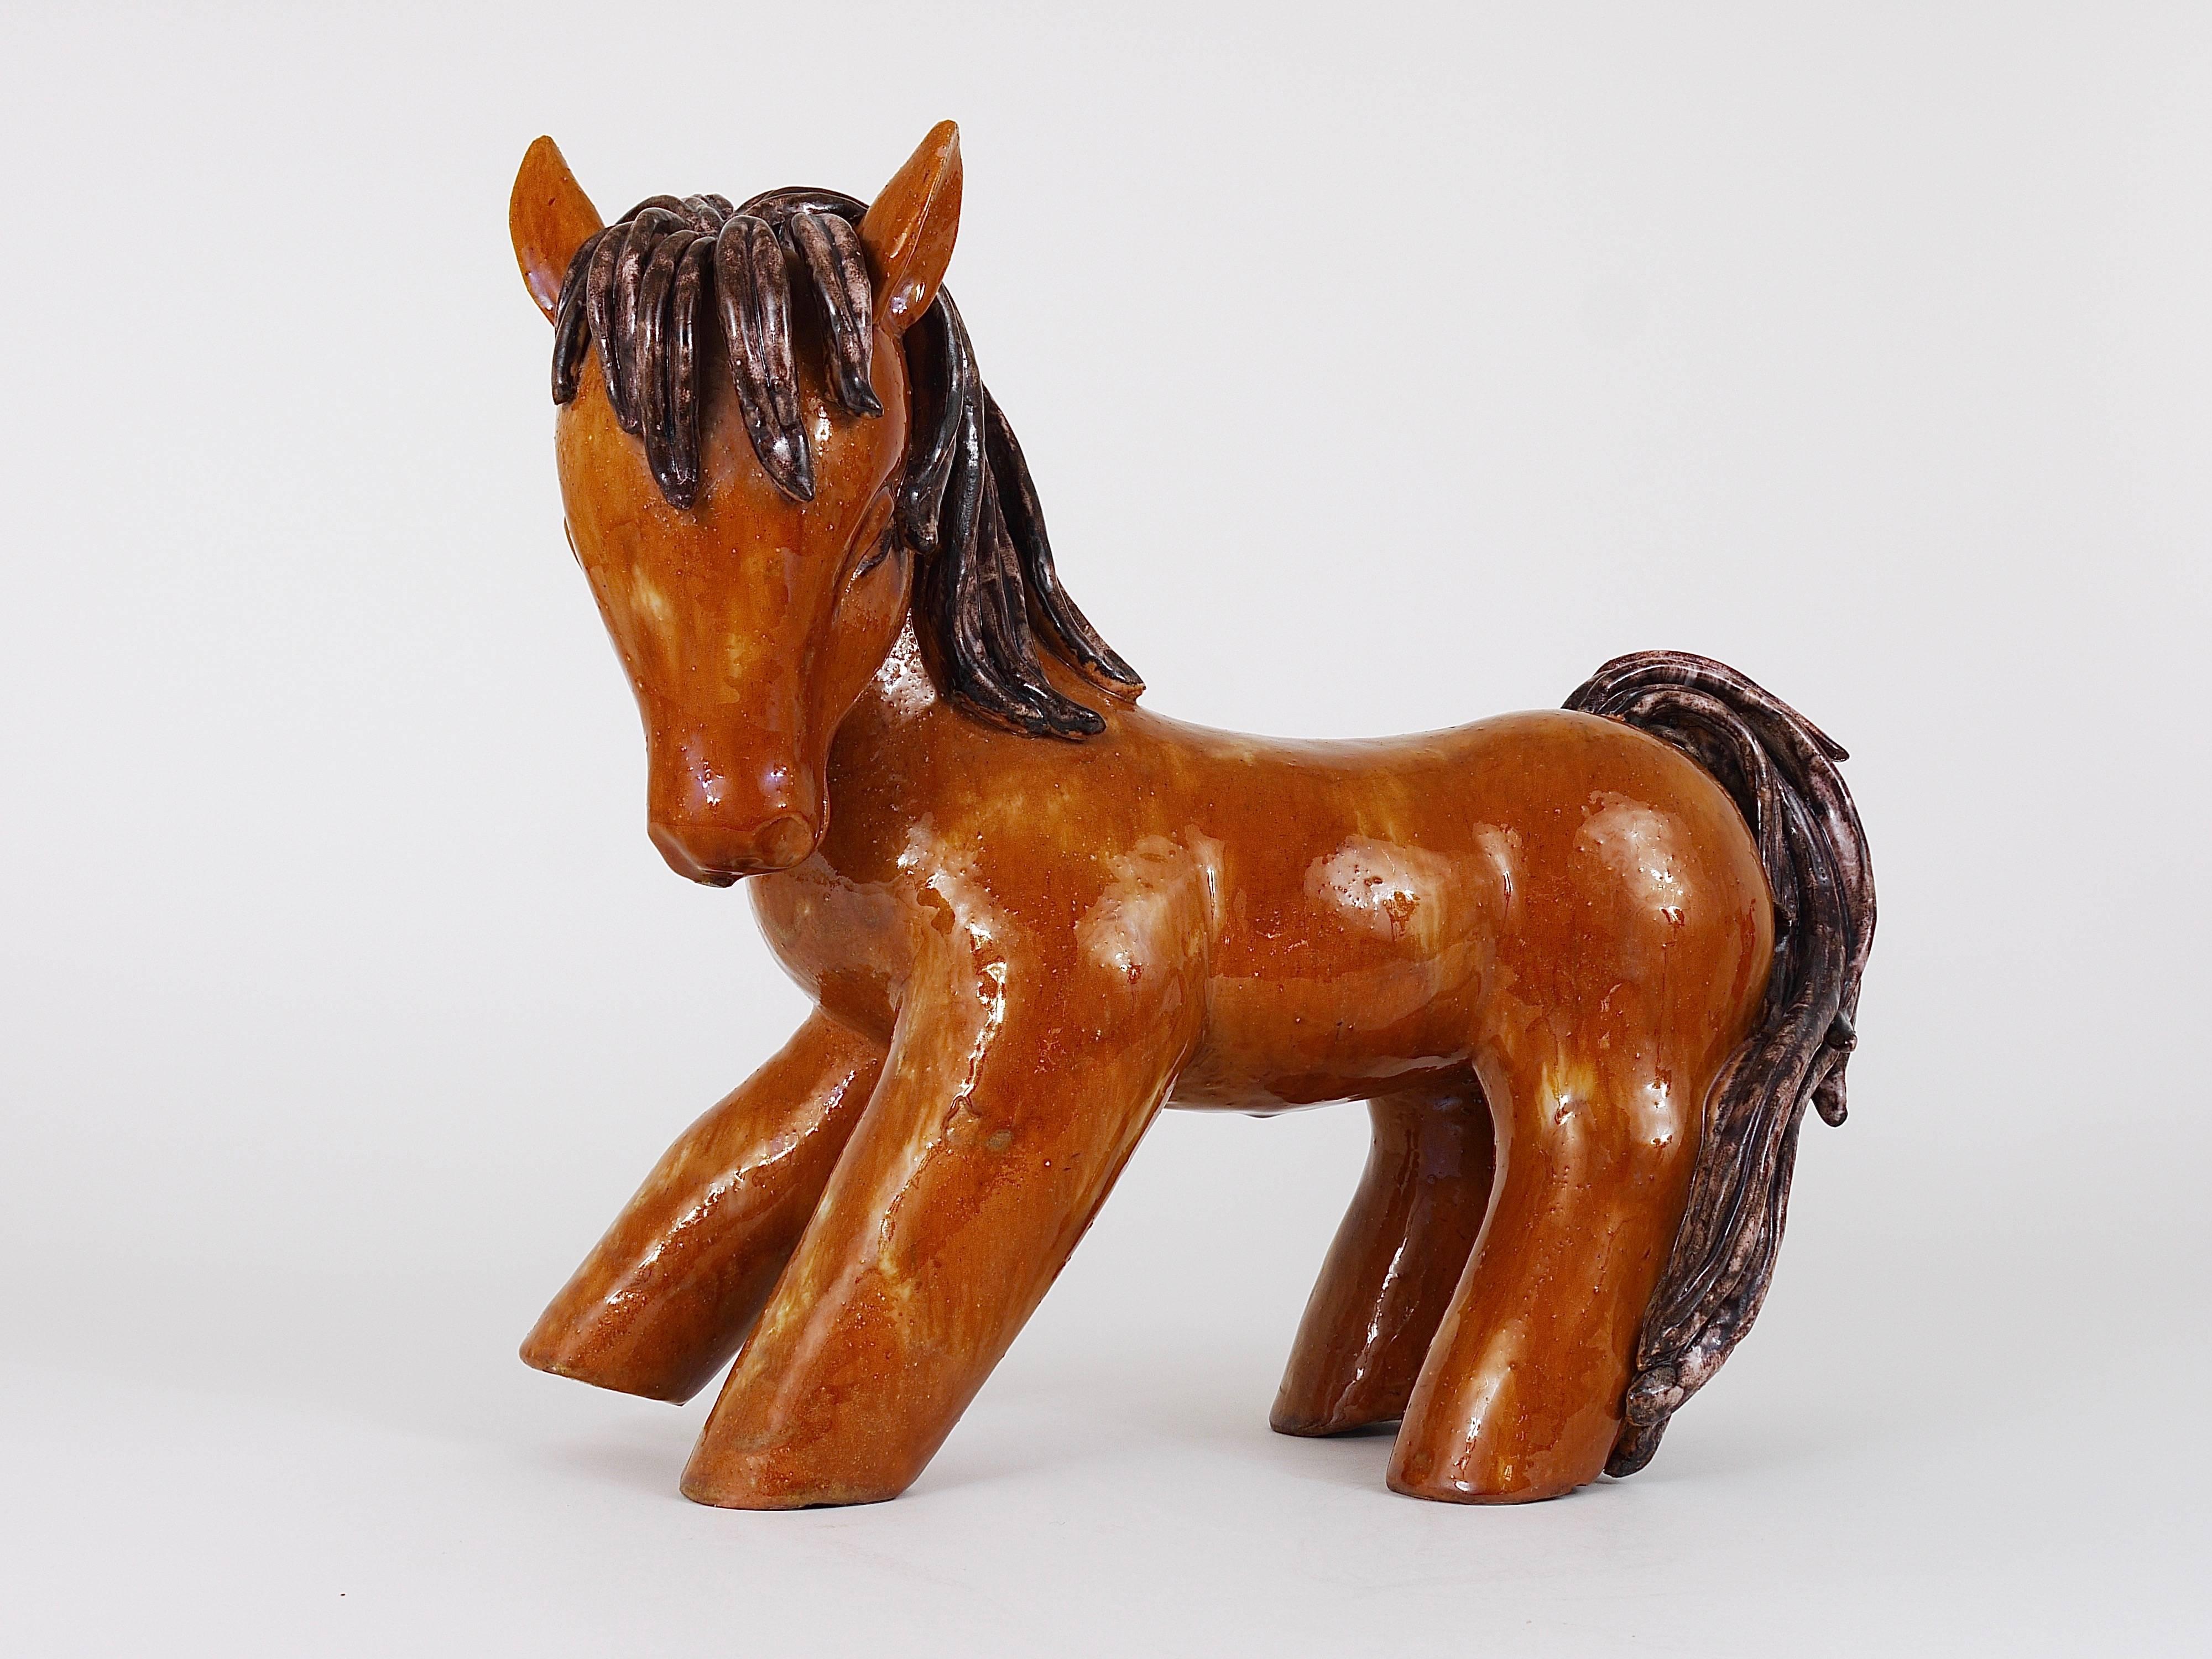 Huge Walter Bosse Pottery Ceramic Horse Sculpture, Austria, 1950s In Excellent Condition For Sale In Vienna, AT